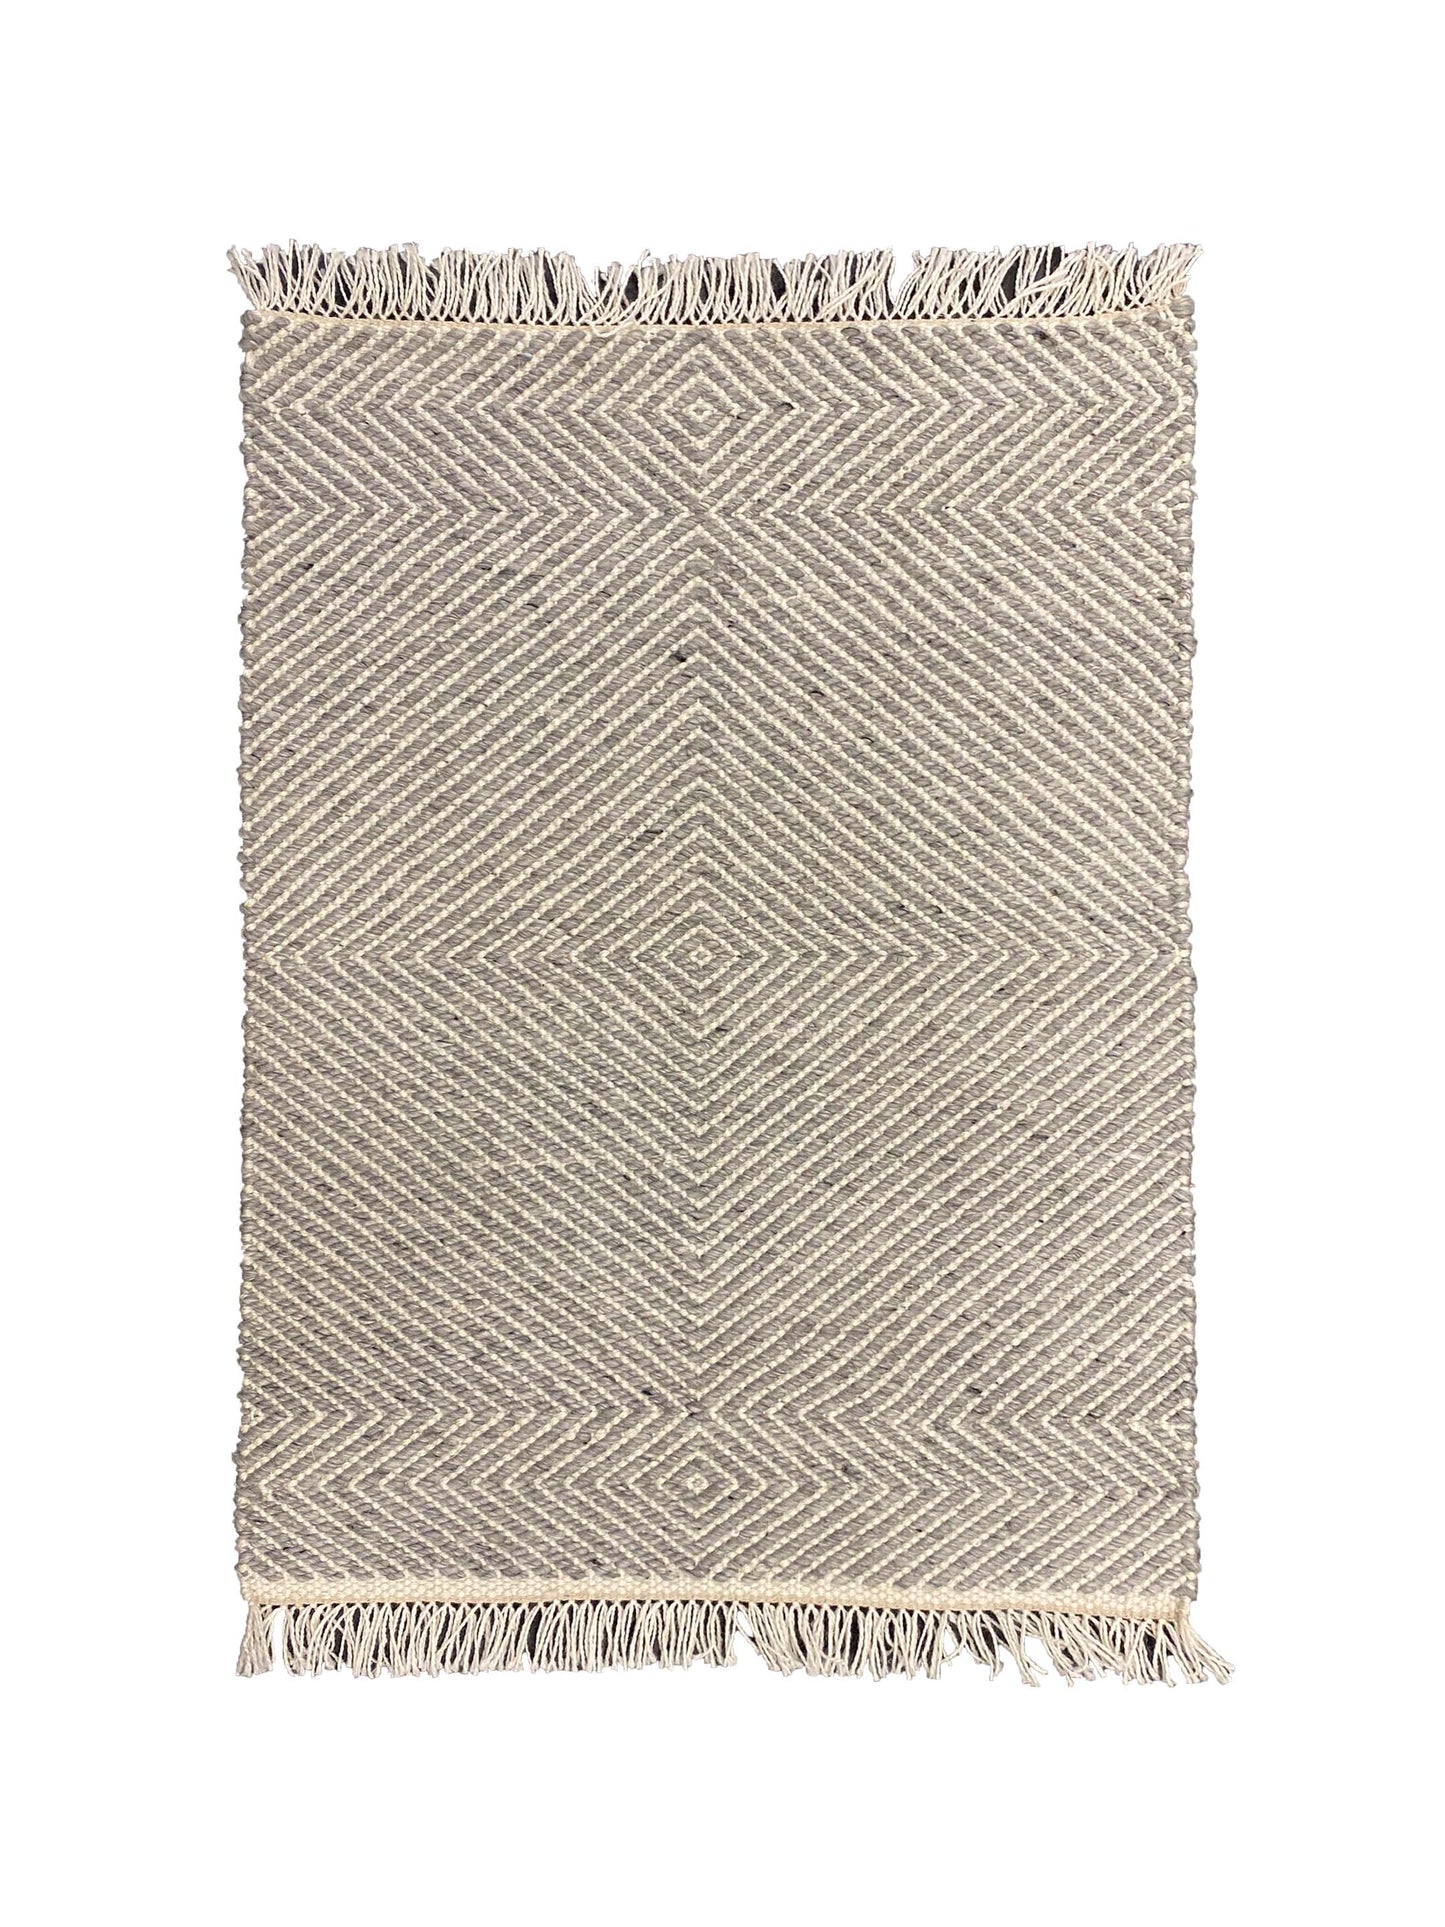 Artisan Paige Assorted-1 Silver Modern Woven Rug